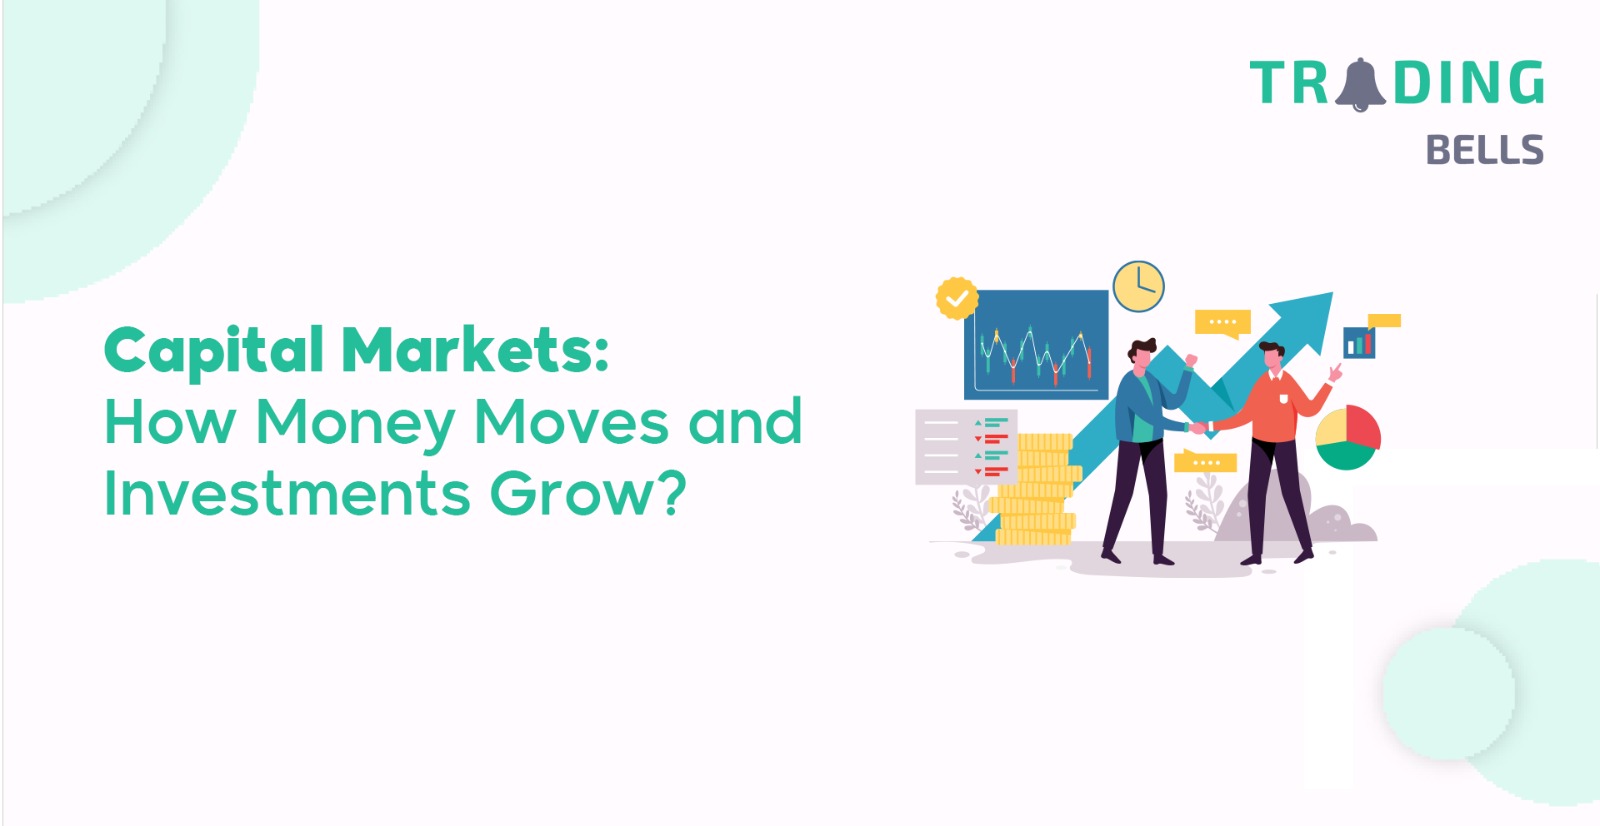 Capital Markets: How Money Moves and Investments Grow?